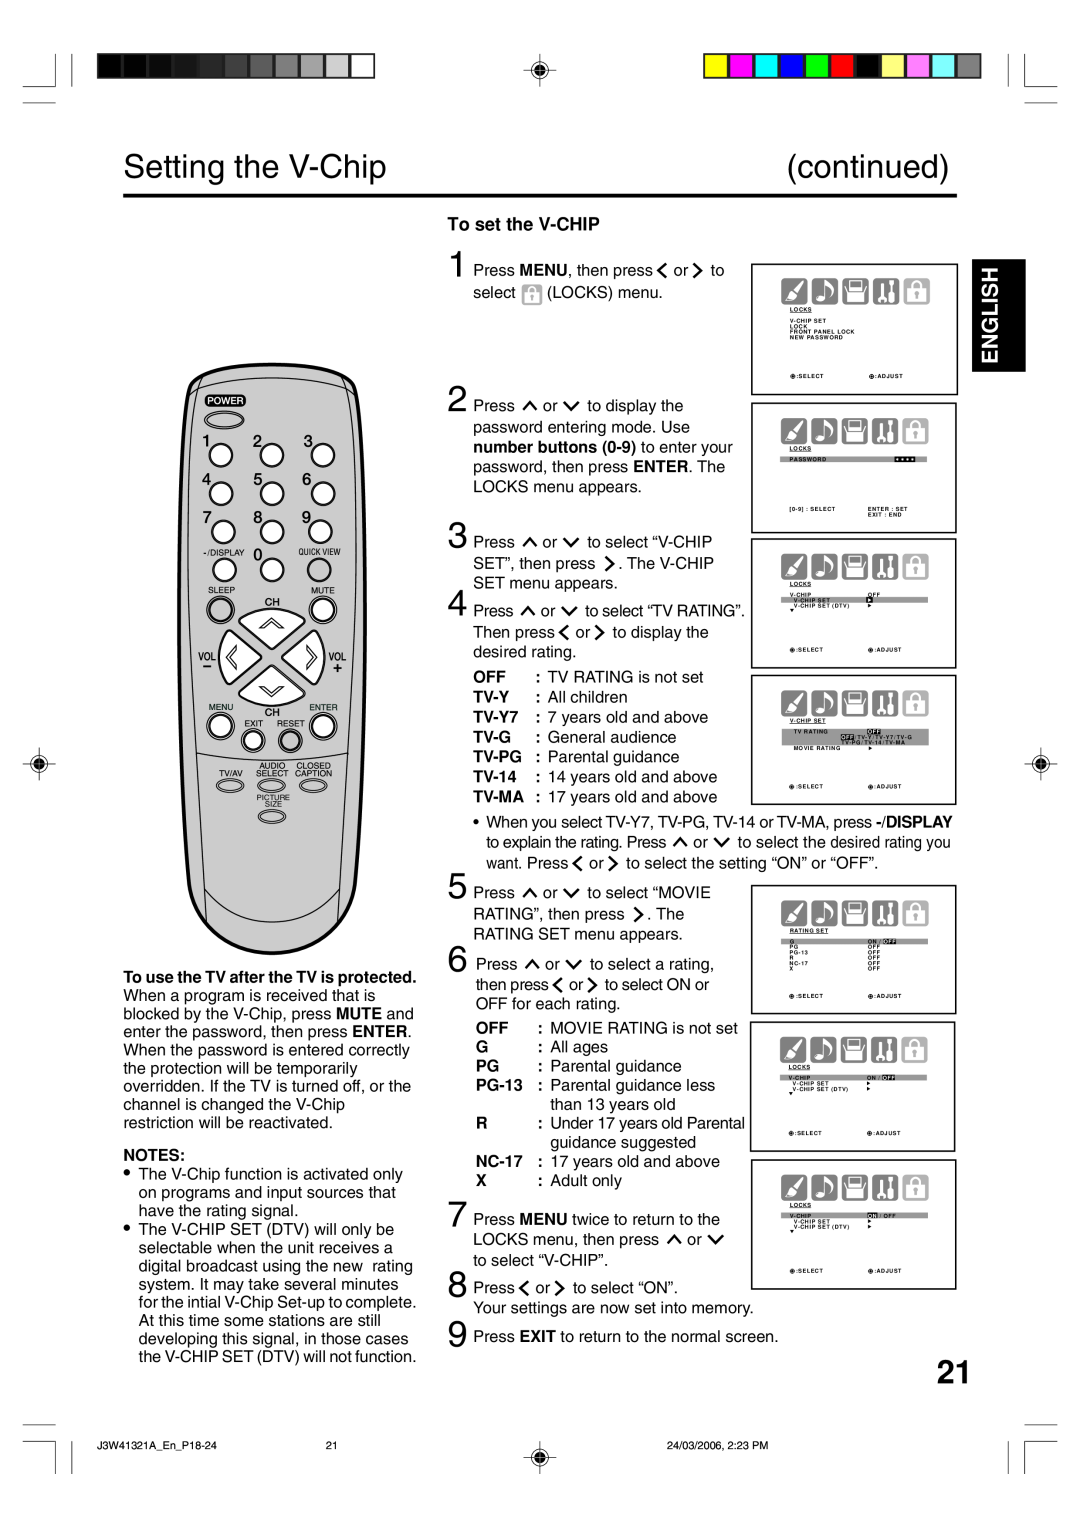 Zenith J3W41321A Setting the V-Chip, continued, English, To set the V-CHIP, number buttons 0-9 to enter your, Tv-Y, TV-Y7 